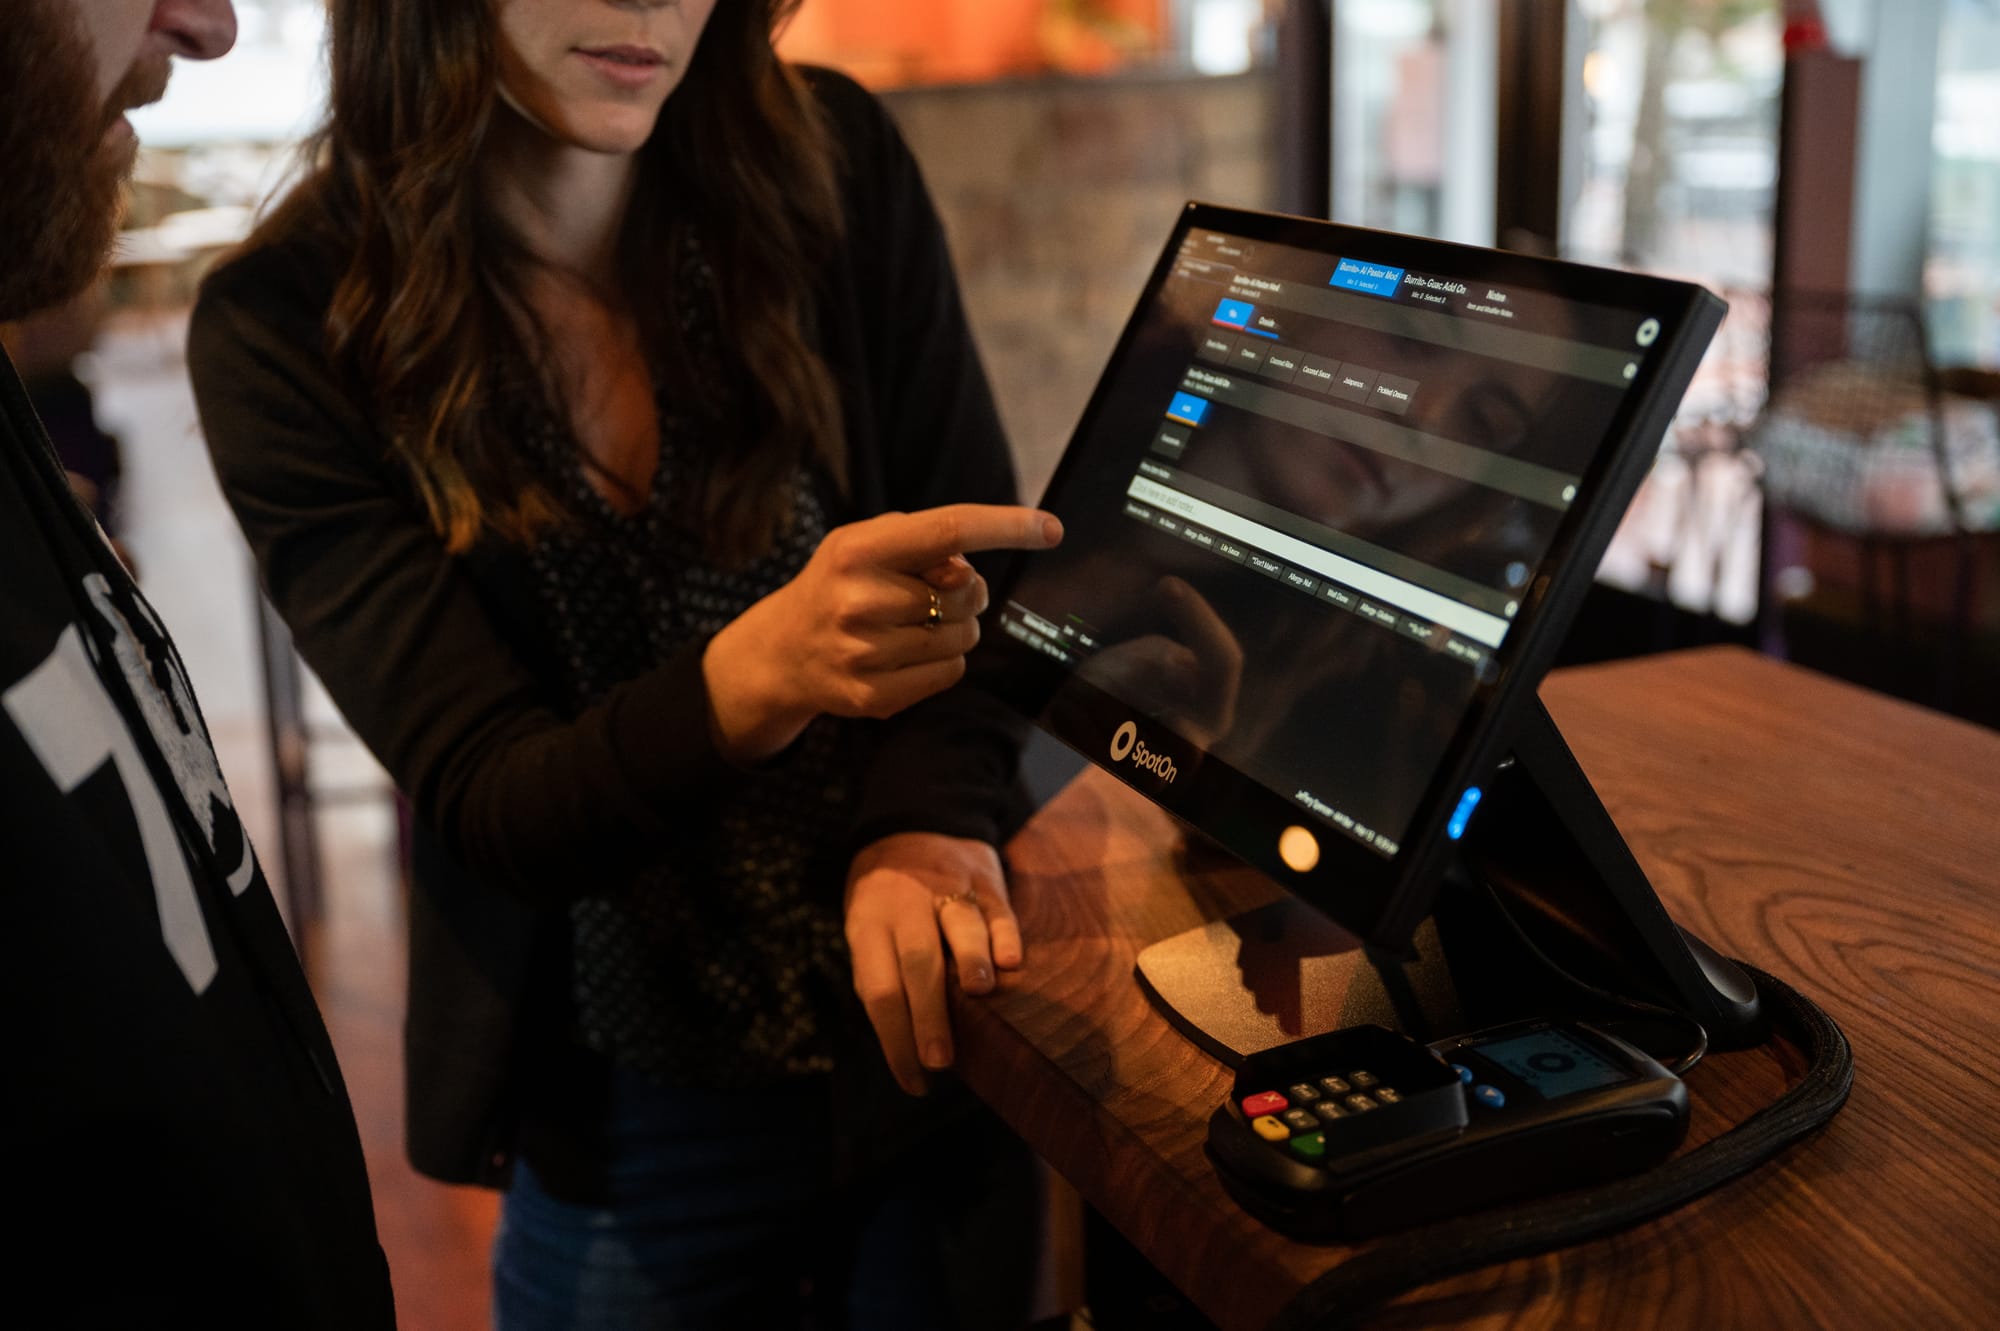 SpotOn point-of-sale system being used by restaurant staff and bar staff to easily serve guests